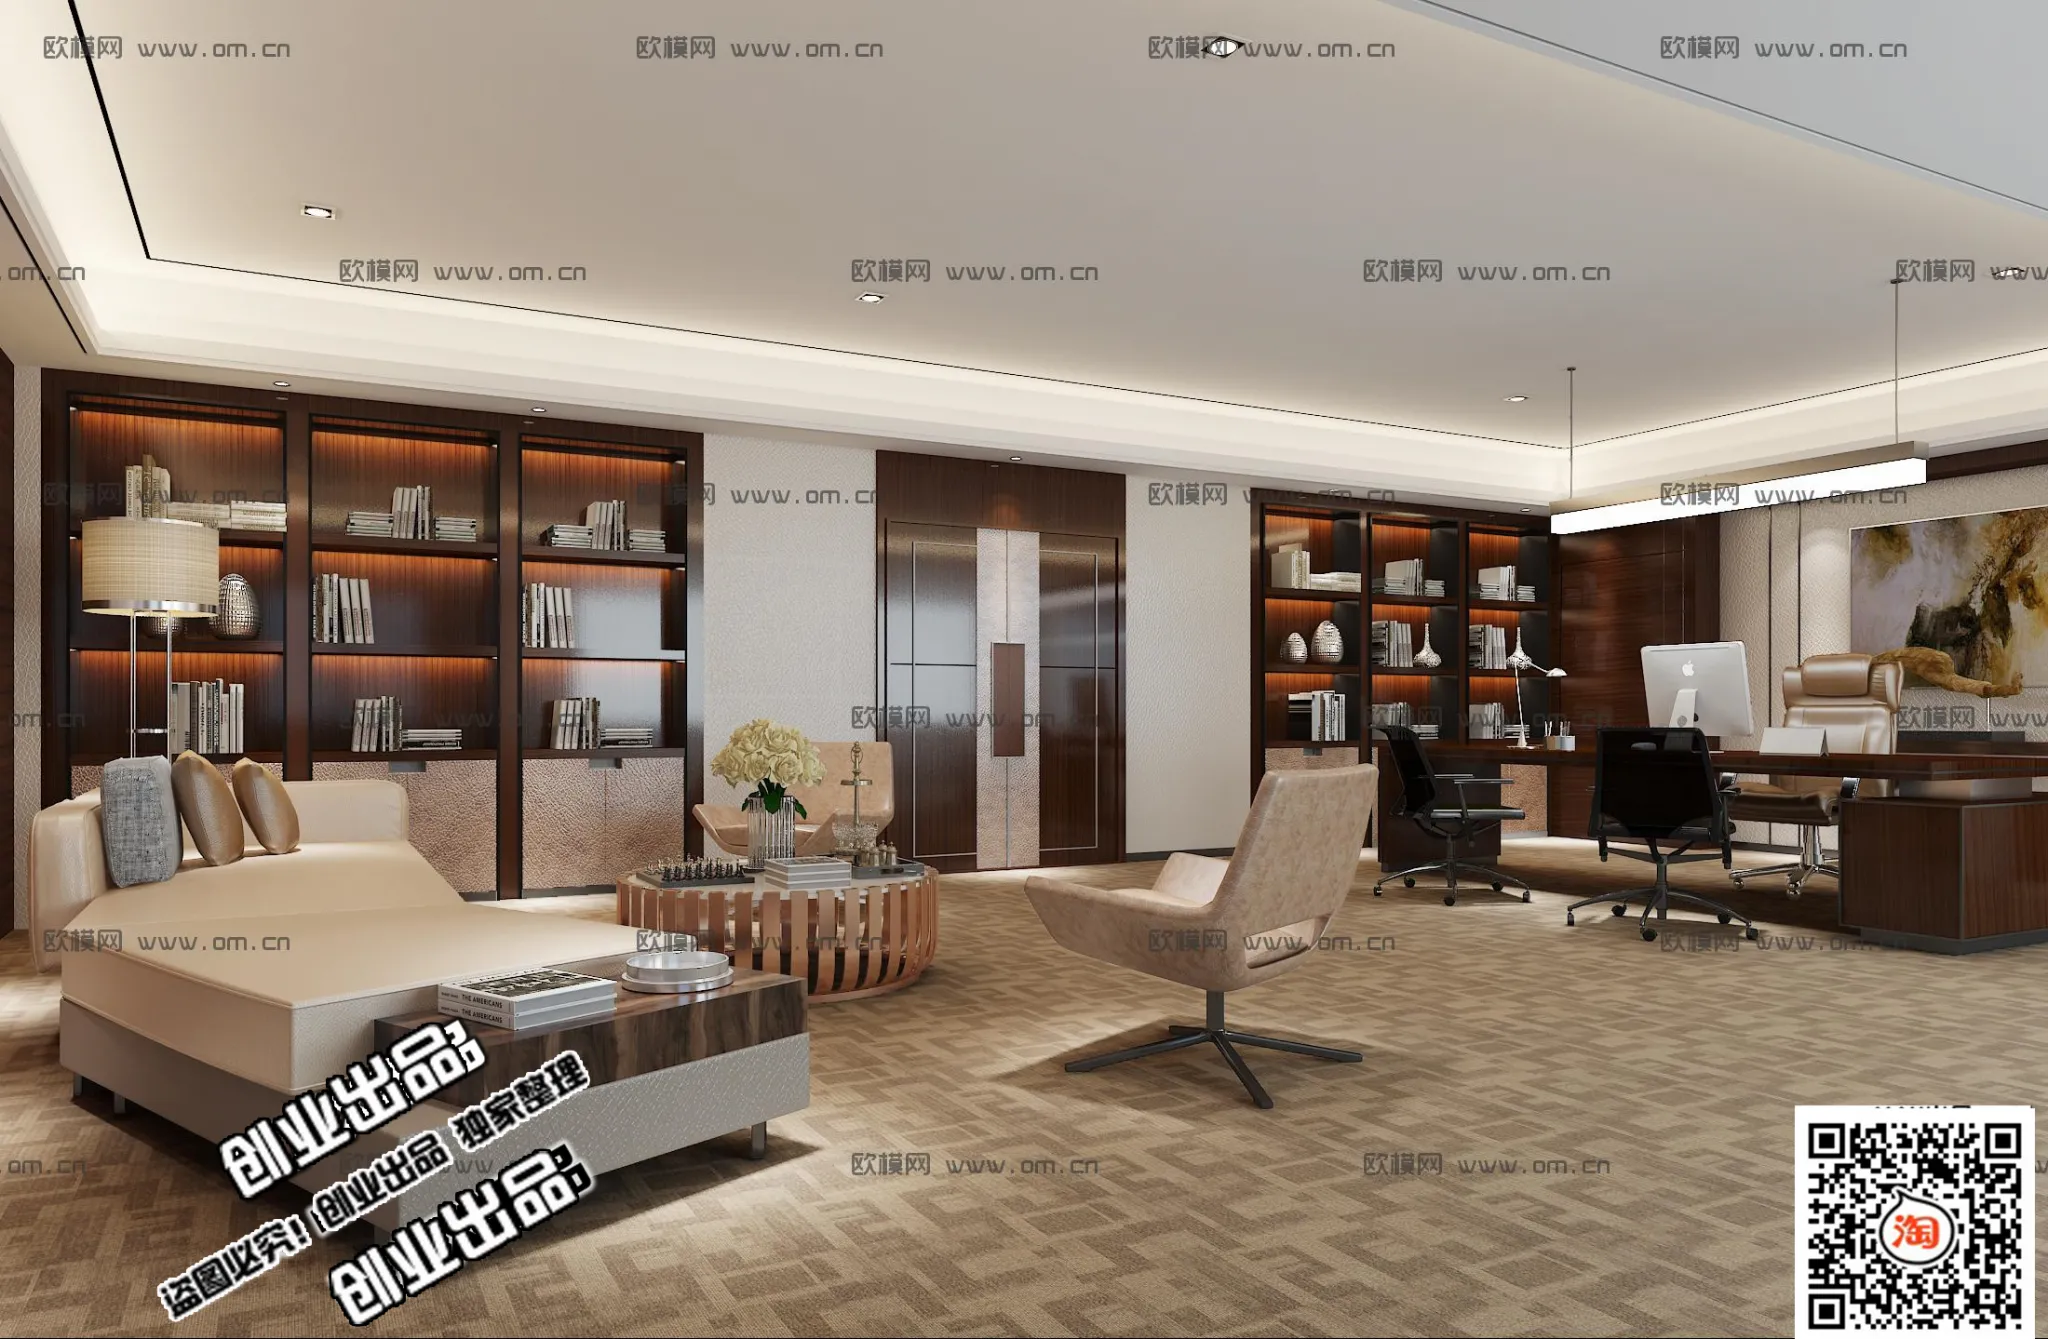 3D OFFICE INTERIOR (VRAY) – MANAGER ROOM 3D SCENES – 058